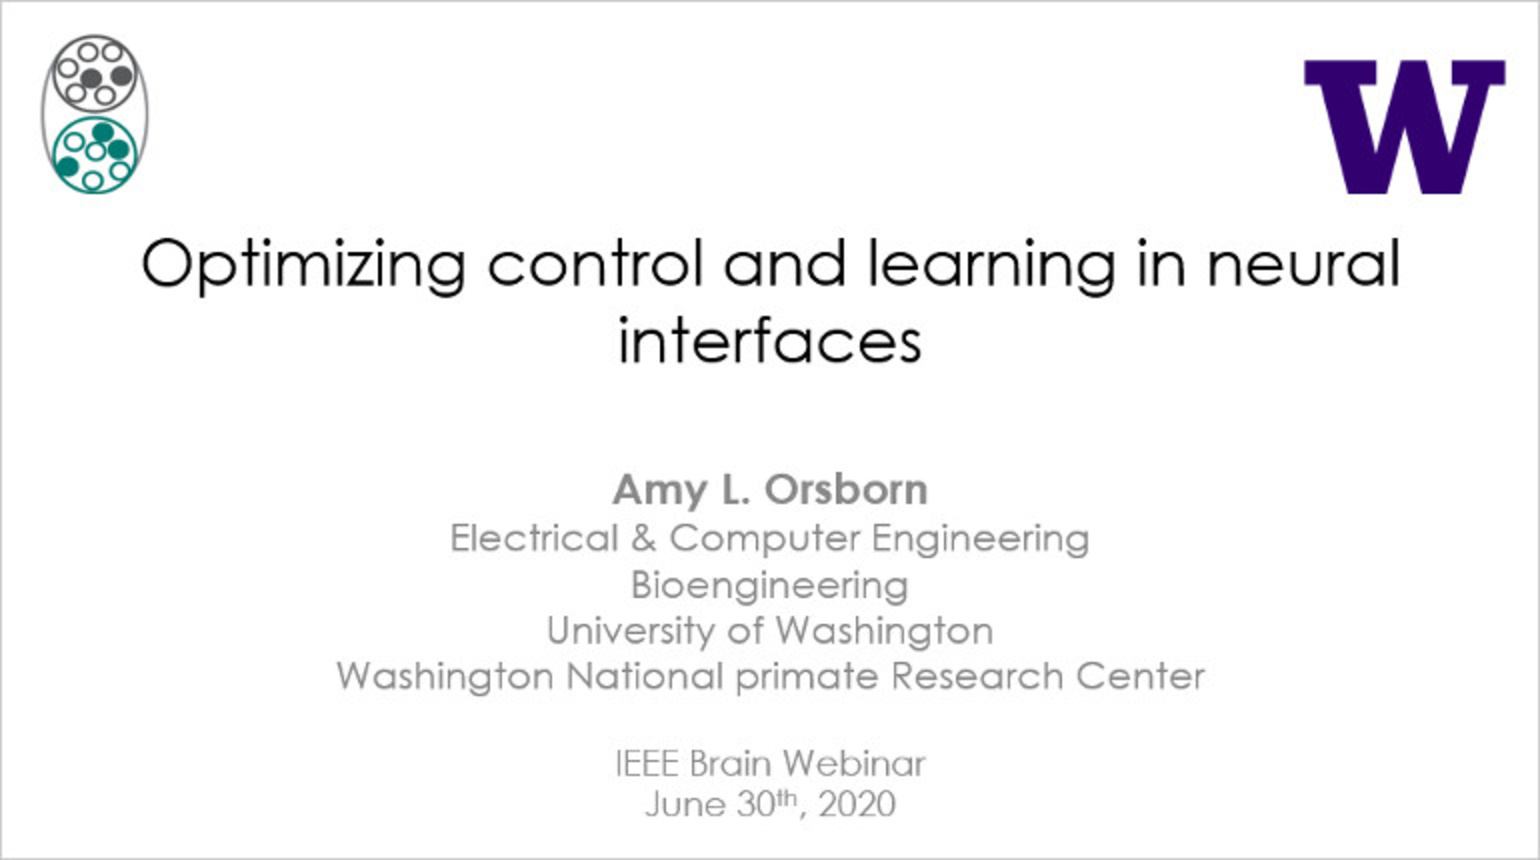 IEEE Brain: Optimizing Control and Learning in Neural Interfaces